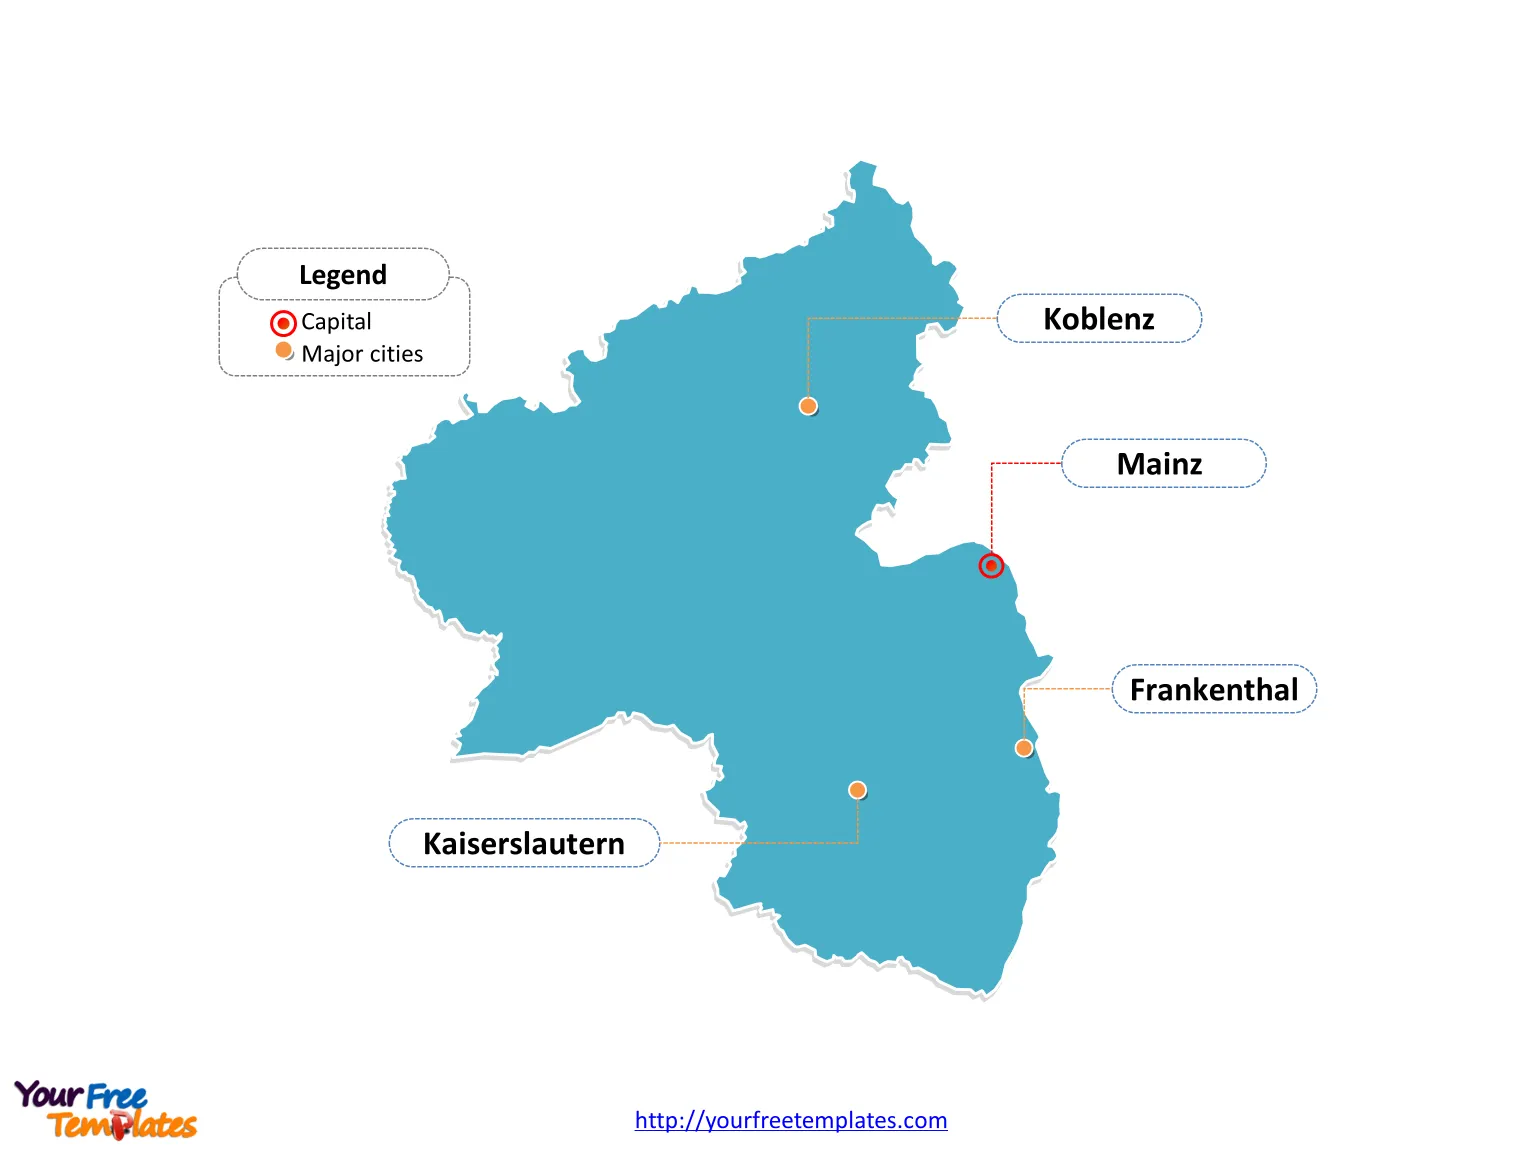 Rhineland-Palatinate Map download labeled with cities